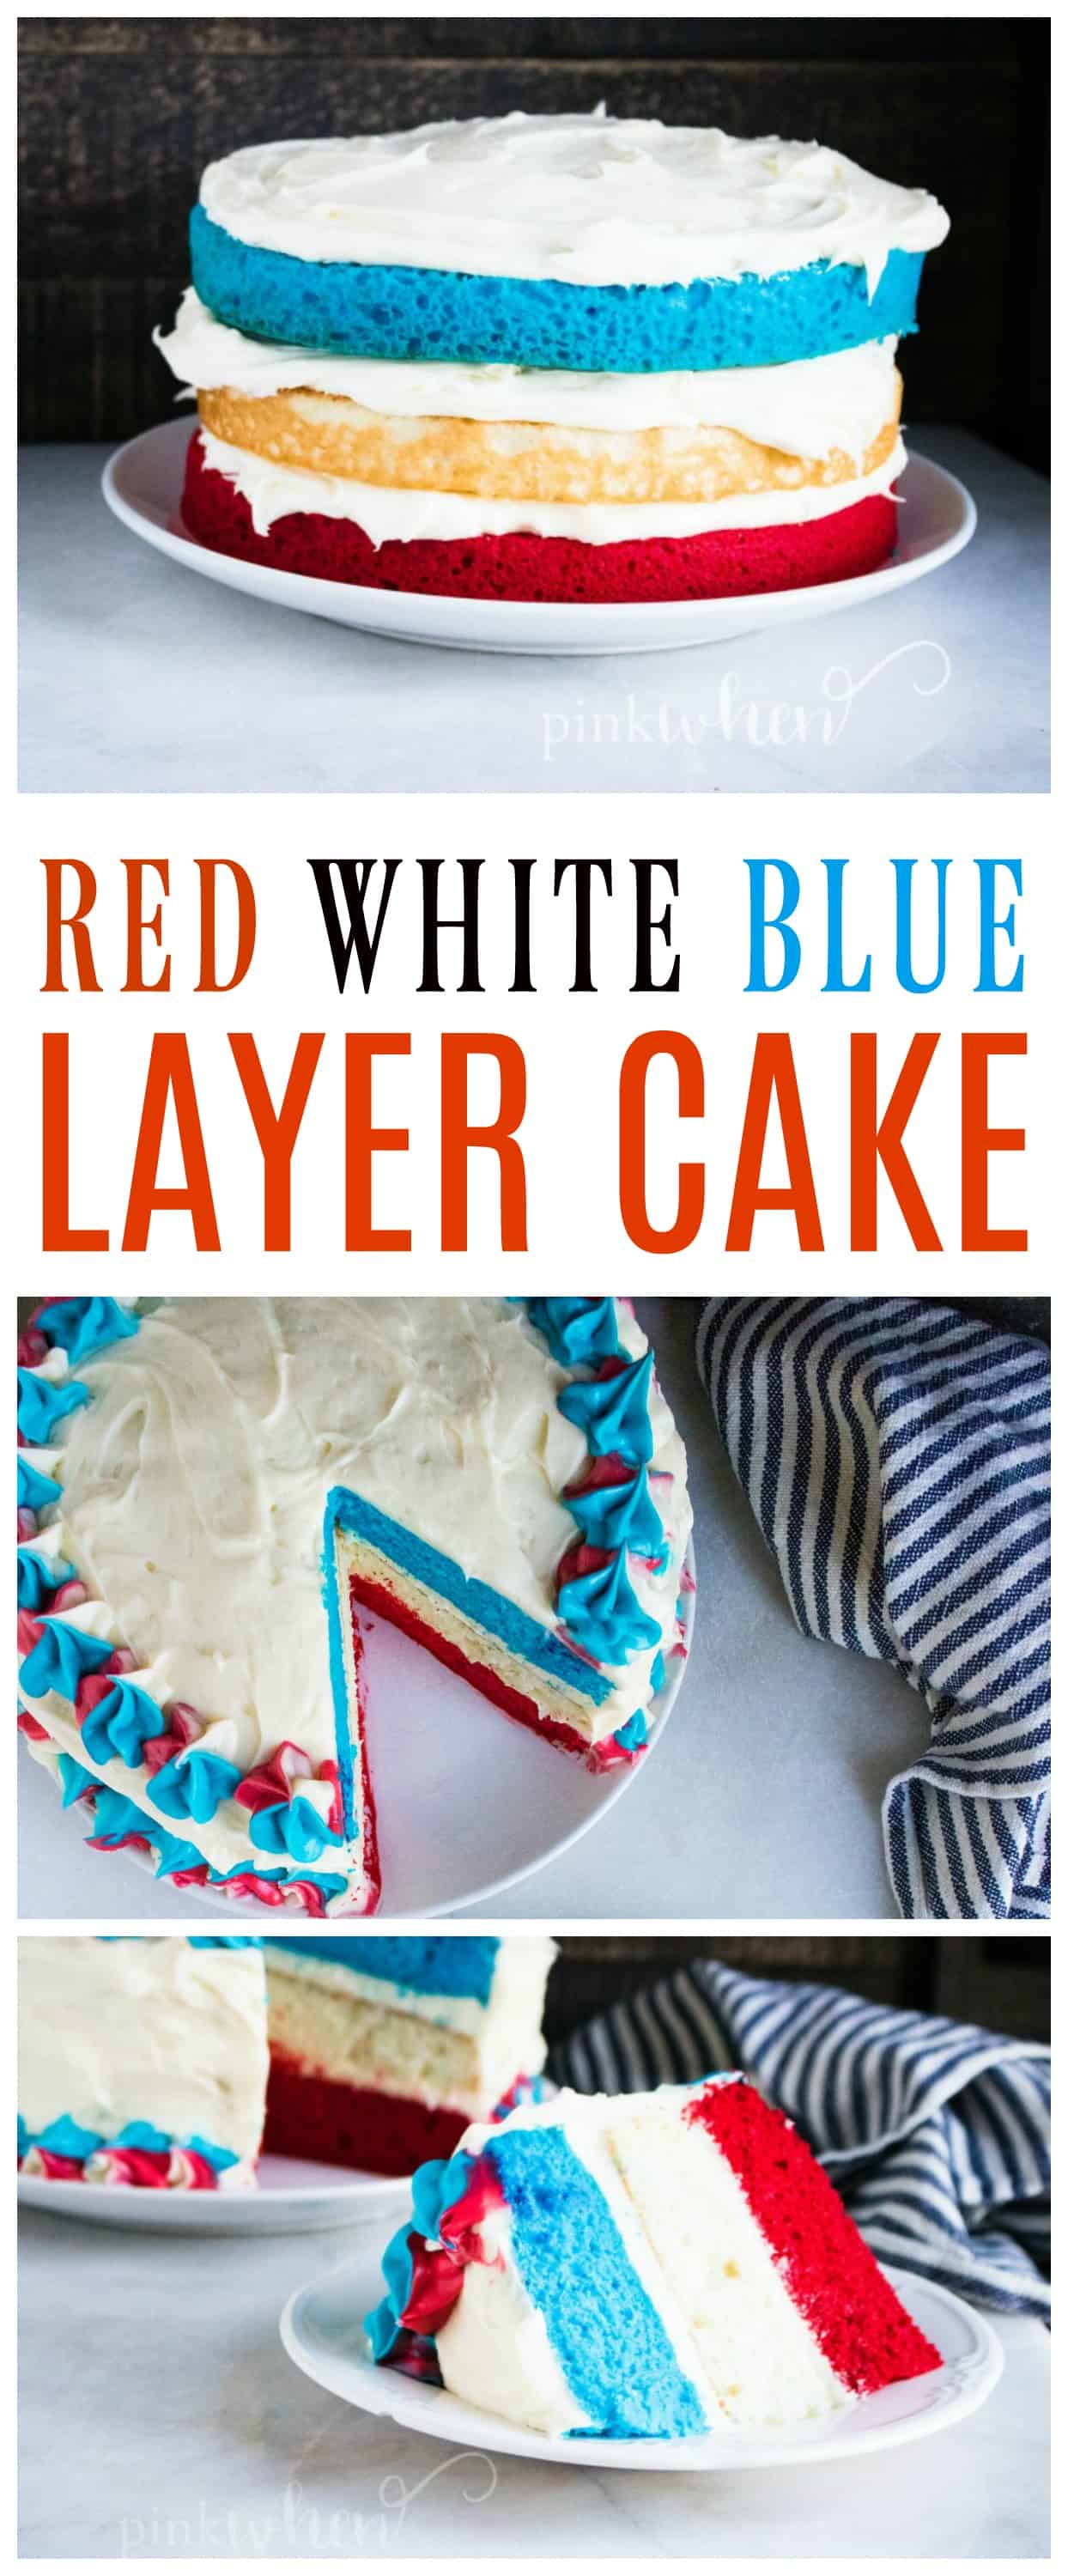 Red White and Blue Patriotic Layer Cake Recipe! Share this easy dessert with your friends and family at your next get-together #4thofJuly #FouthOfJuly #RedWhieBlueDessert #July4thdessert #4thofJulyDessert